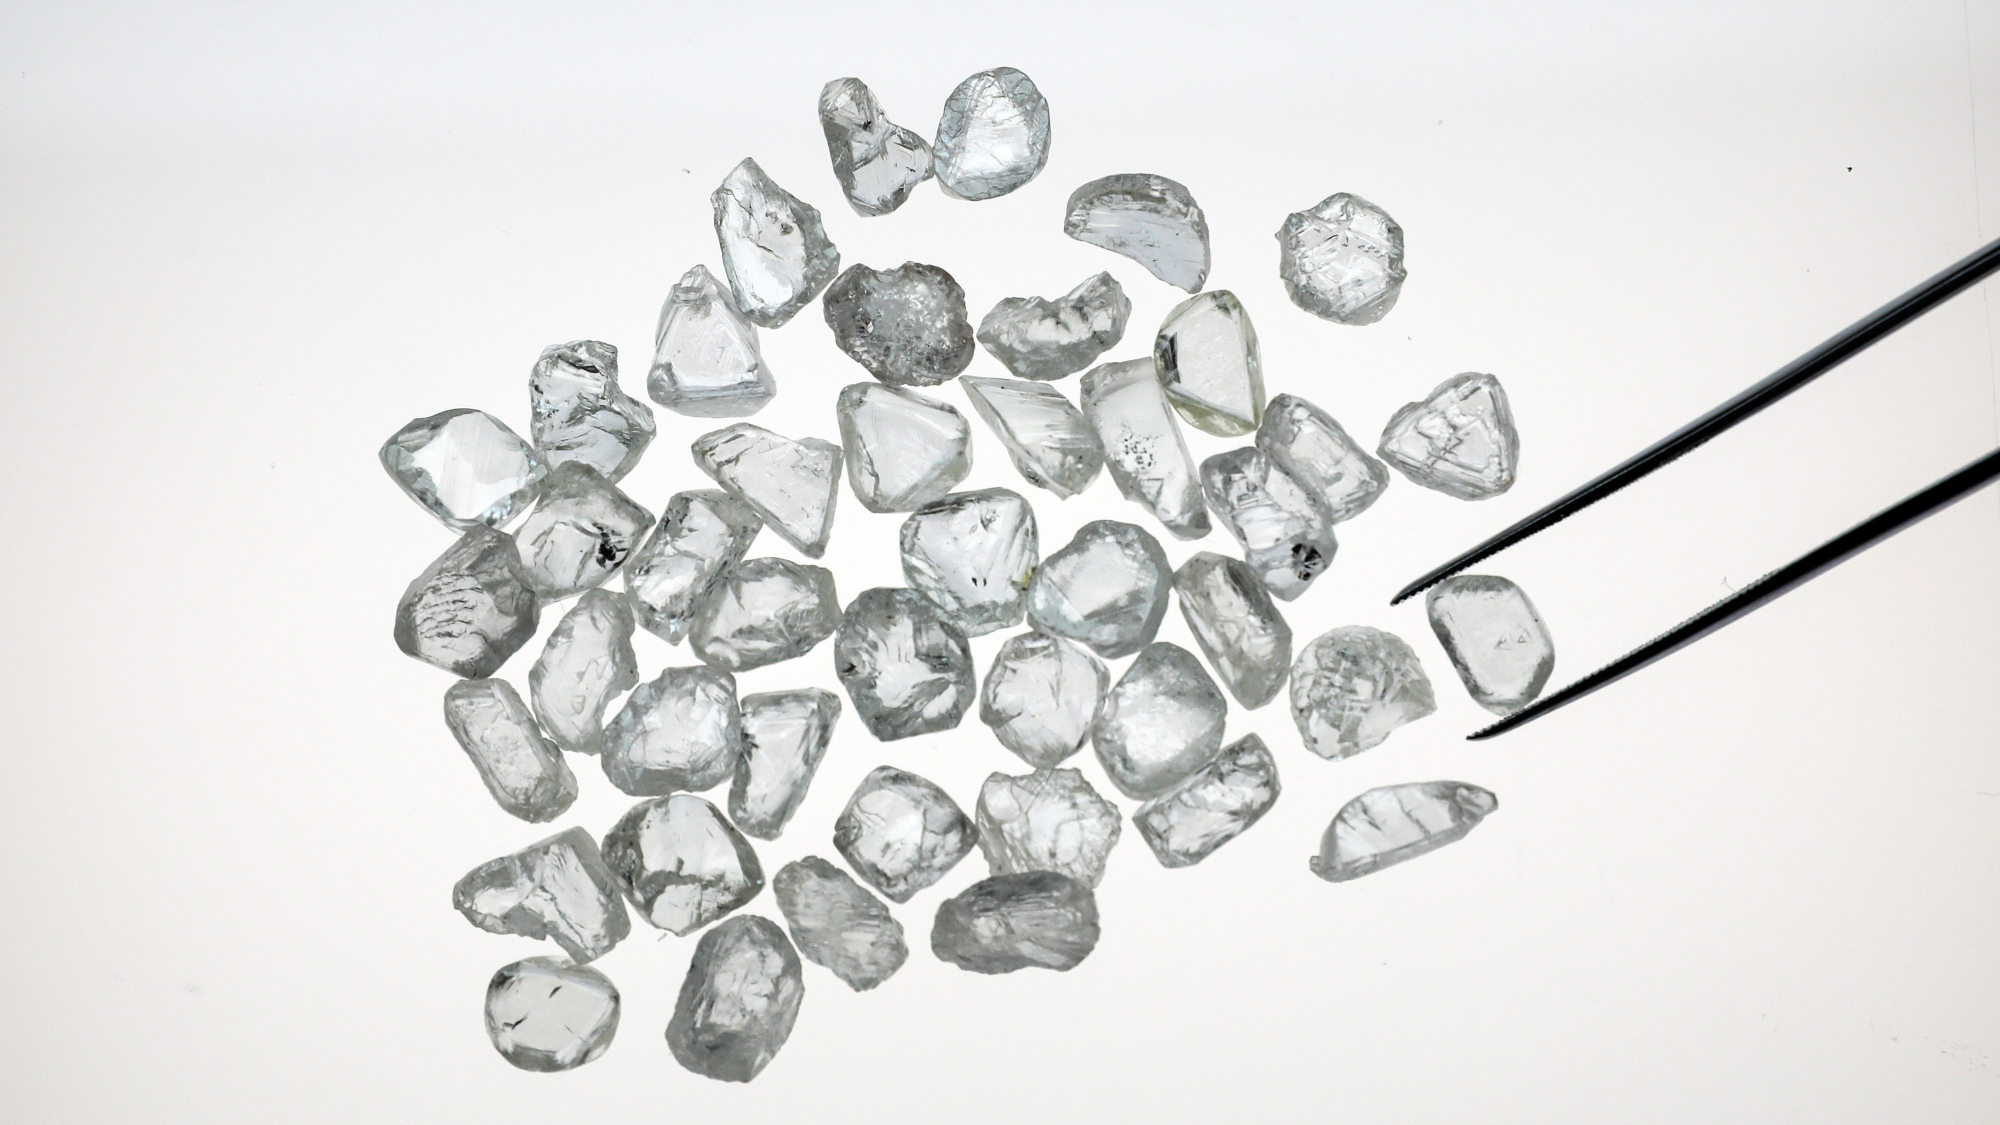 Pleasing demand for De Beers rough, lab-created sales surging - Jeweller  Magazine: Jewellery News and Trends